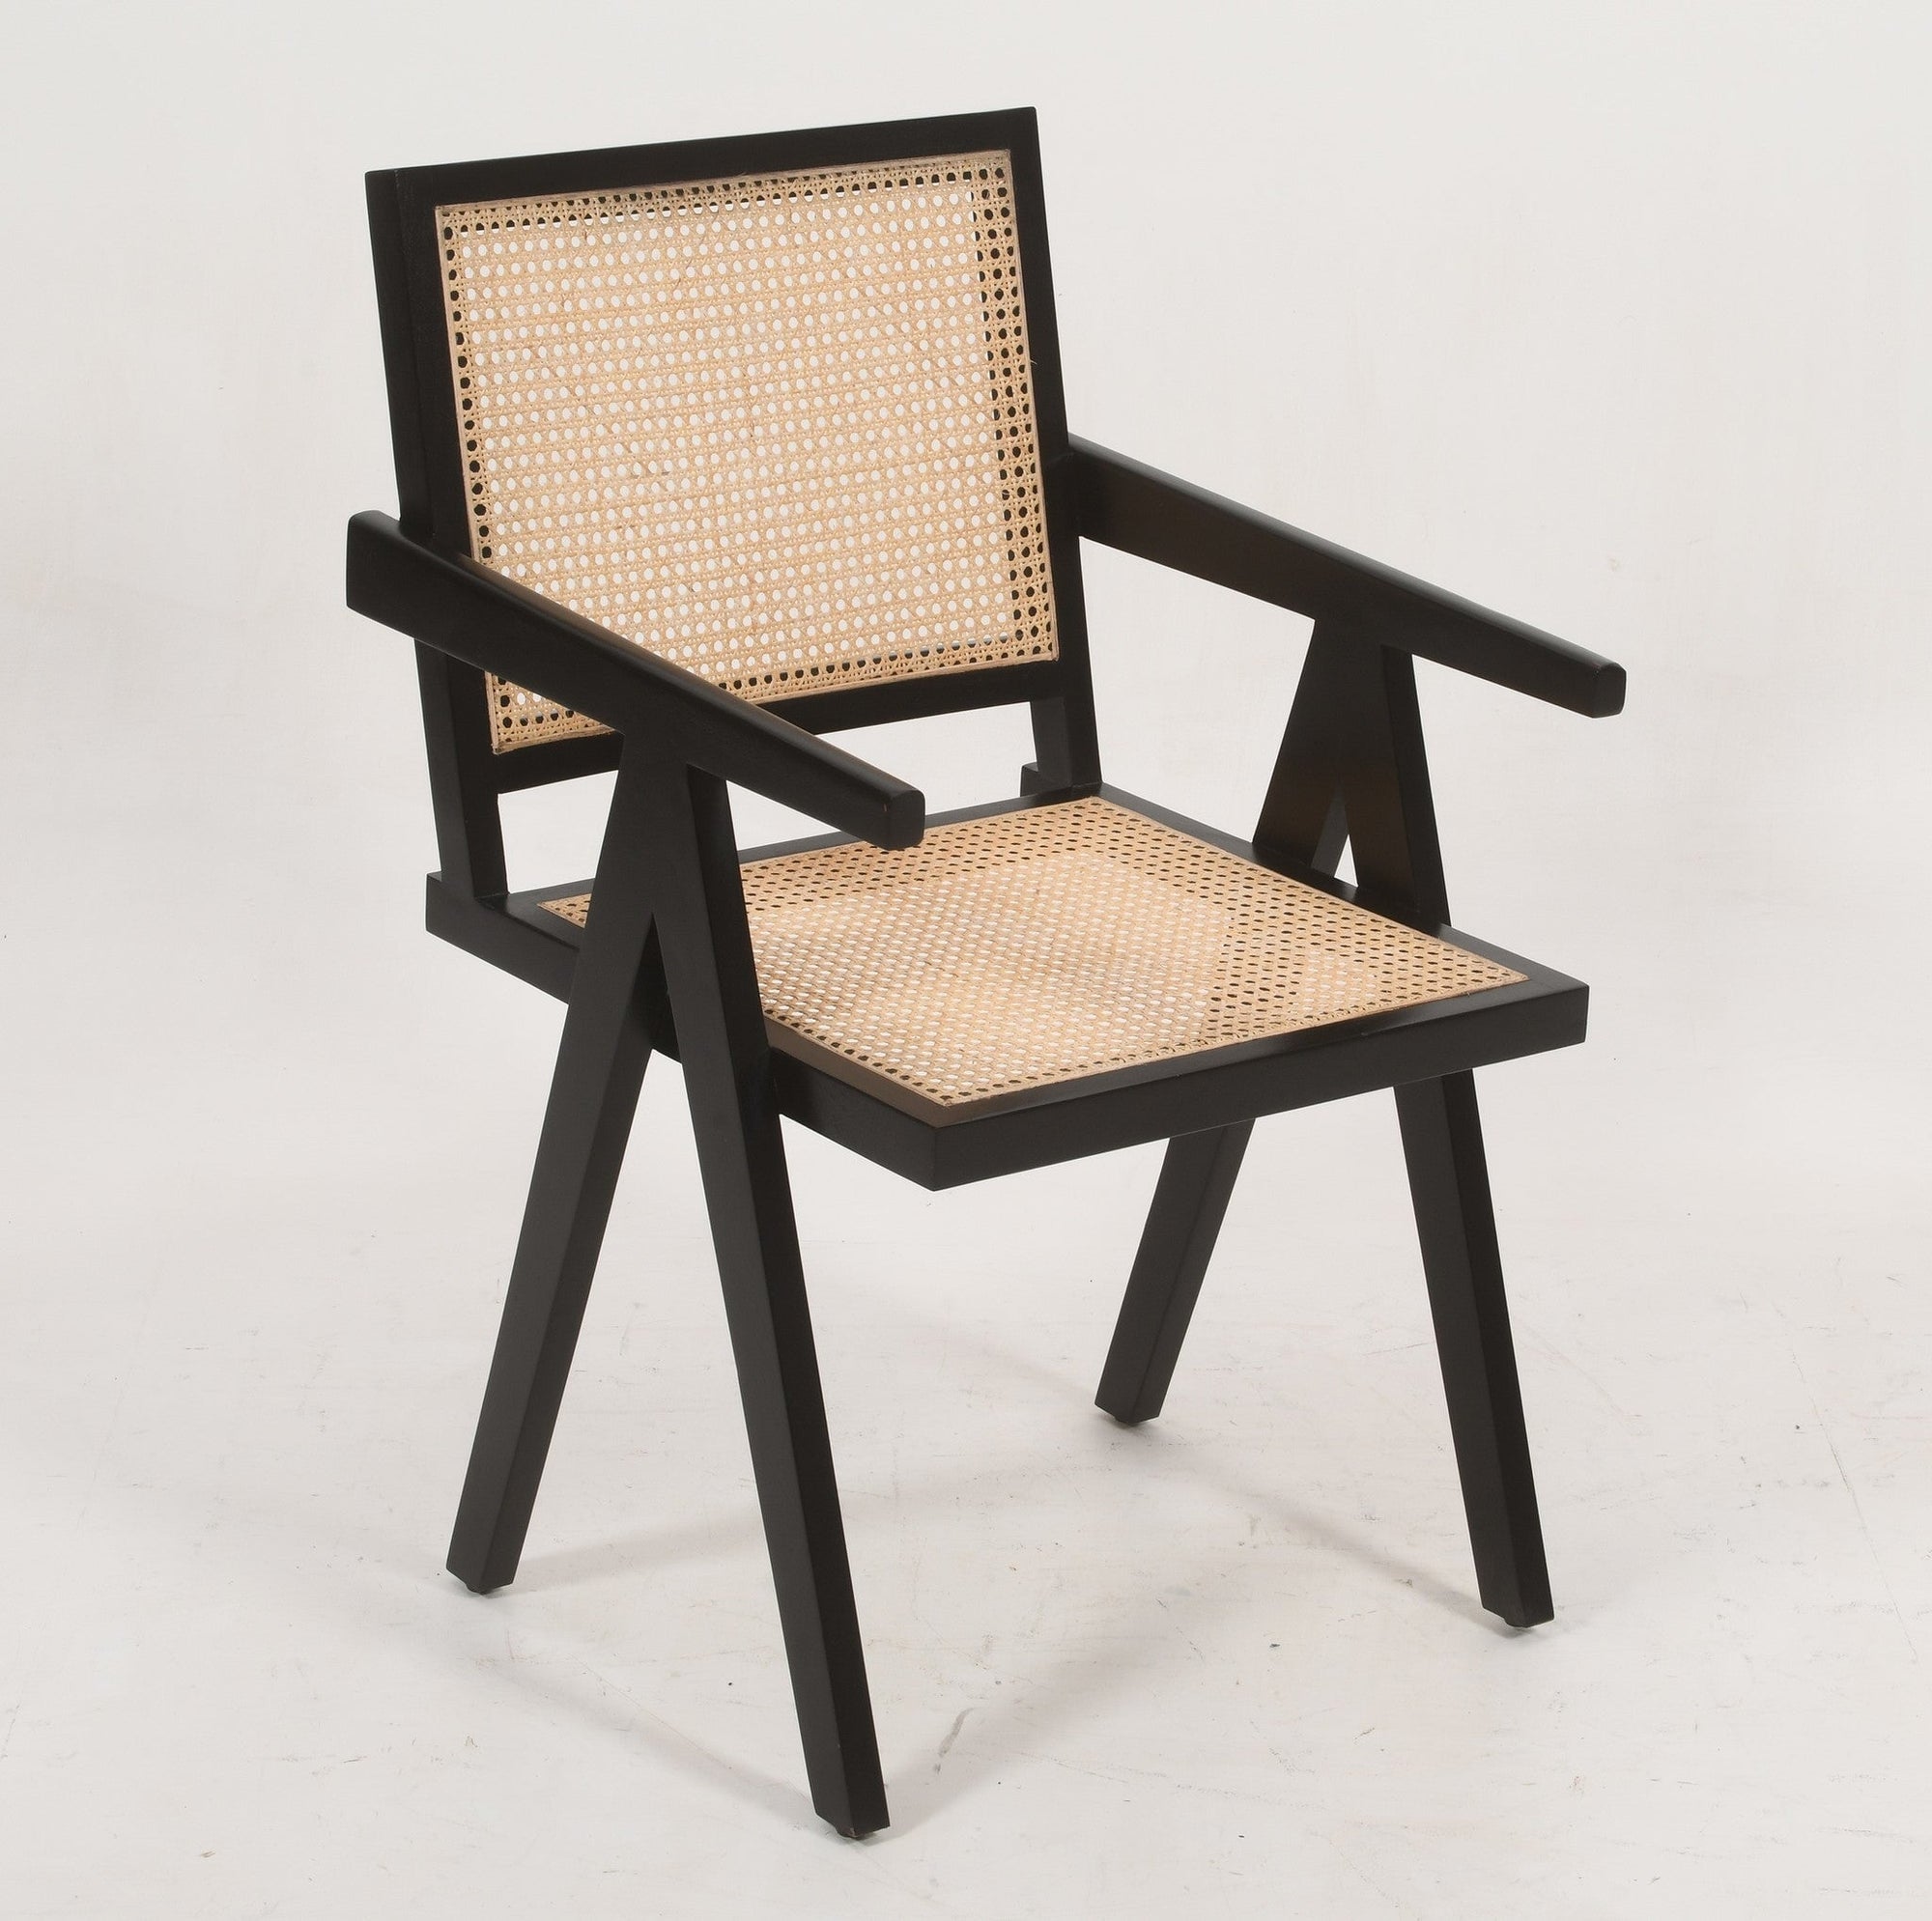 Pierre Jeanneret Solid Acacia Wood Dining Chair with Armrest | Black & Cane Dining Chair Casa Maria Designs 